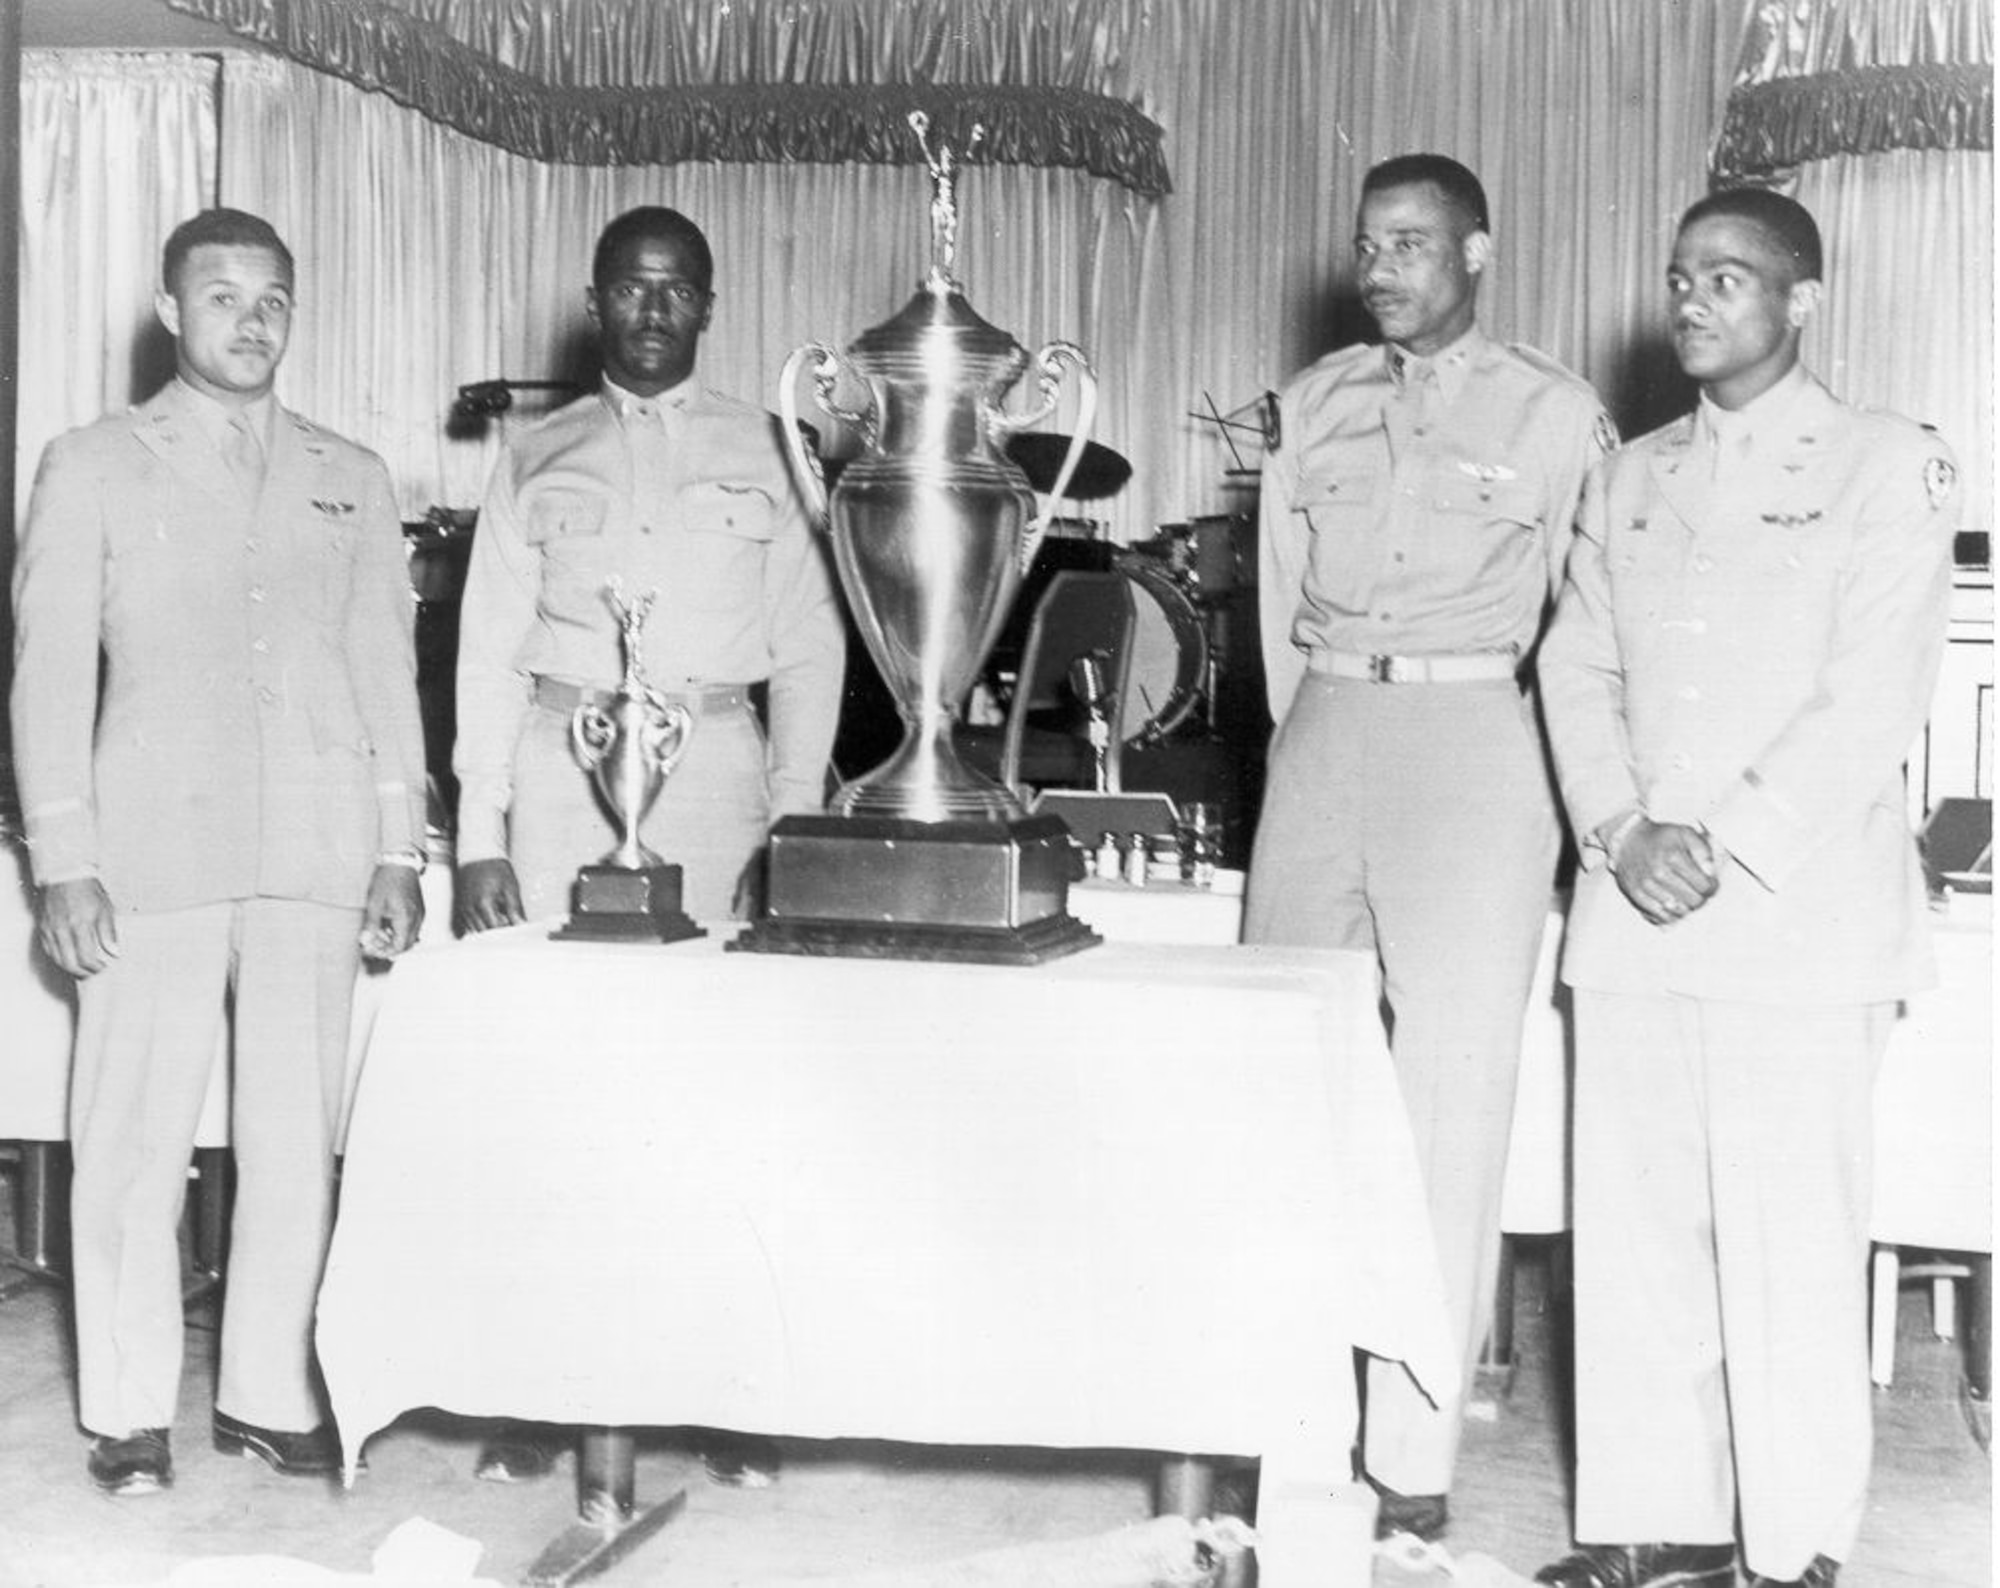 Lt. Col. James Harvey, won early weapons competition as Tuskegee Airman.